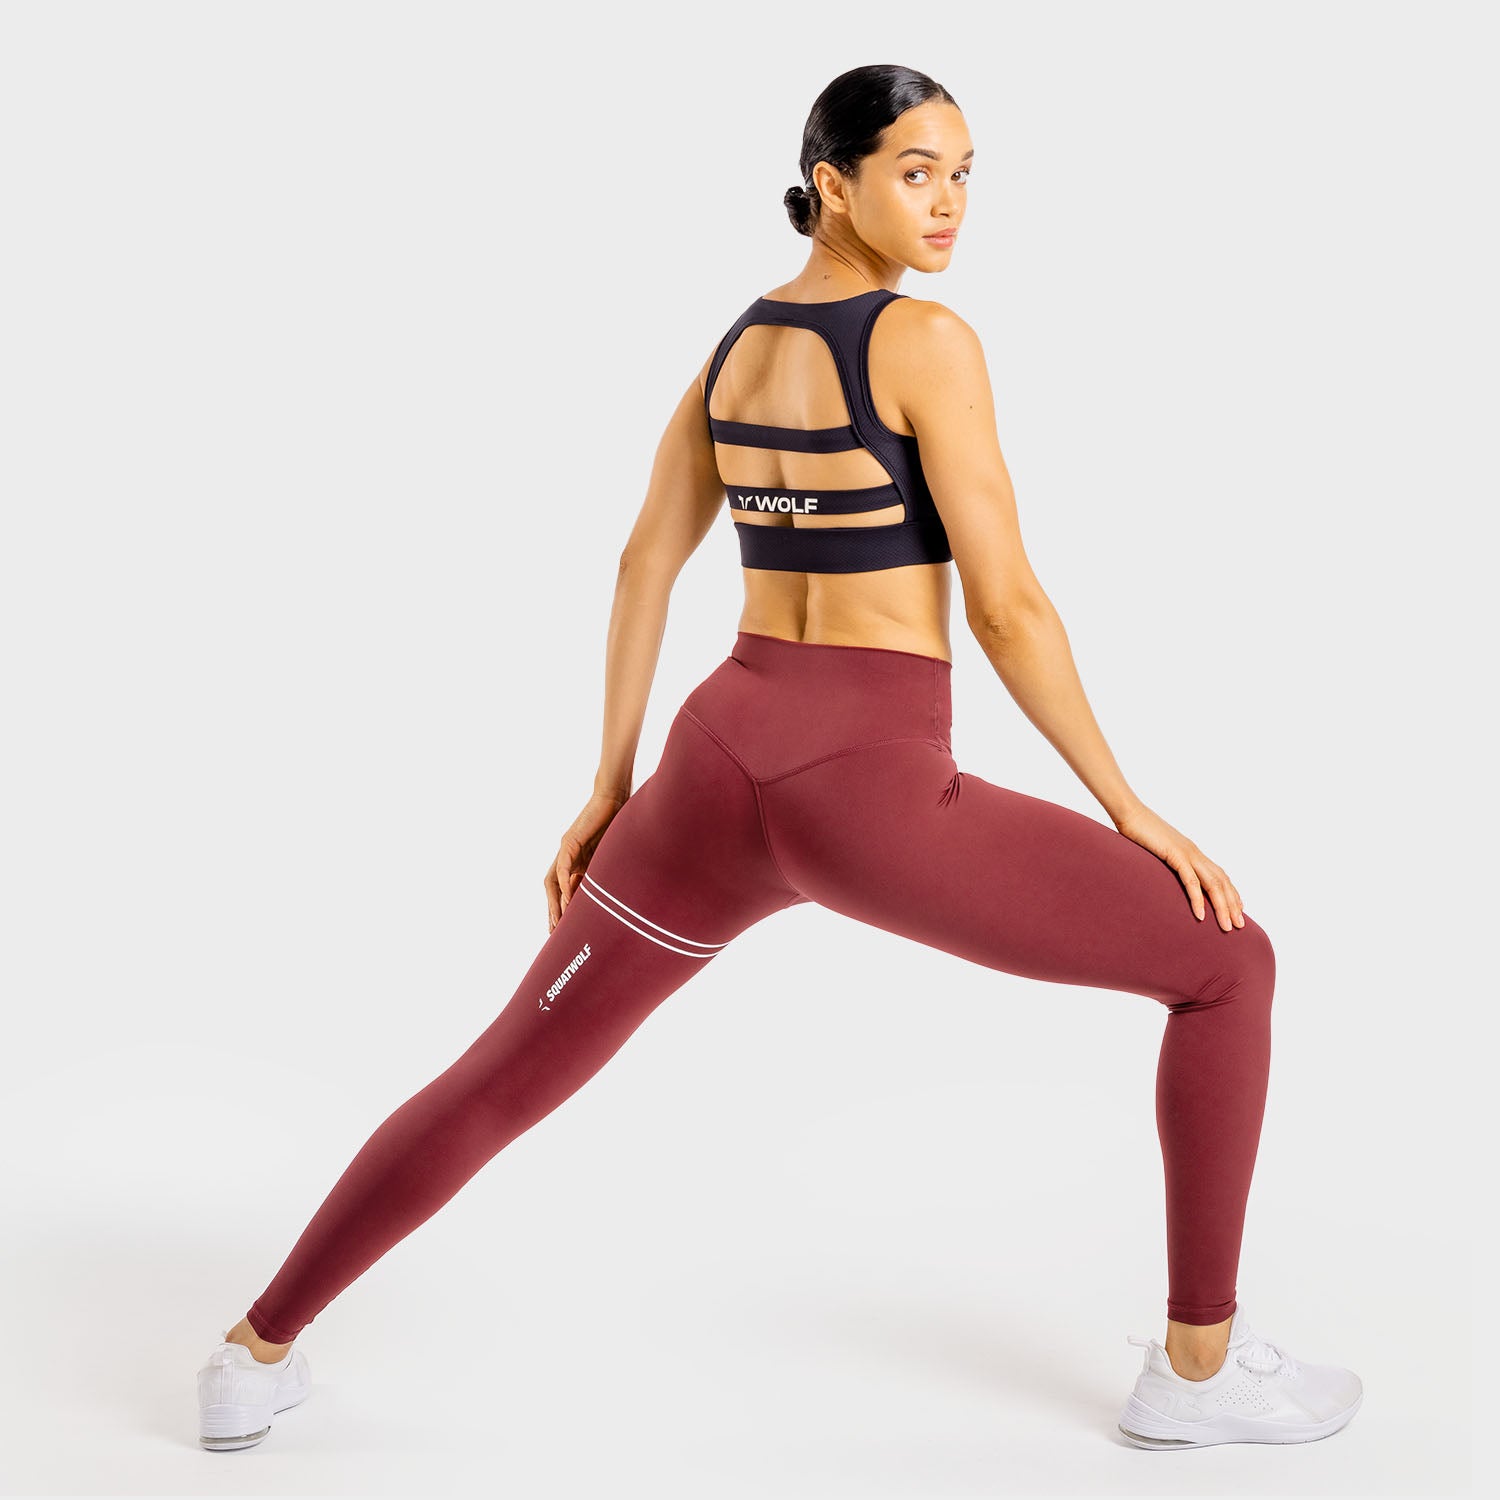 Women yoga set gym clothing Female Sport fitness suit Running Clothes yoga  top+ Leggings women Seamless gym yoga bra suits S-XL - Price history &  Review | AliExpress Seller - NcmRyu Store |